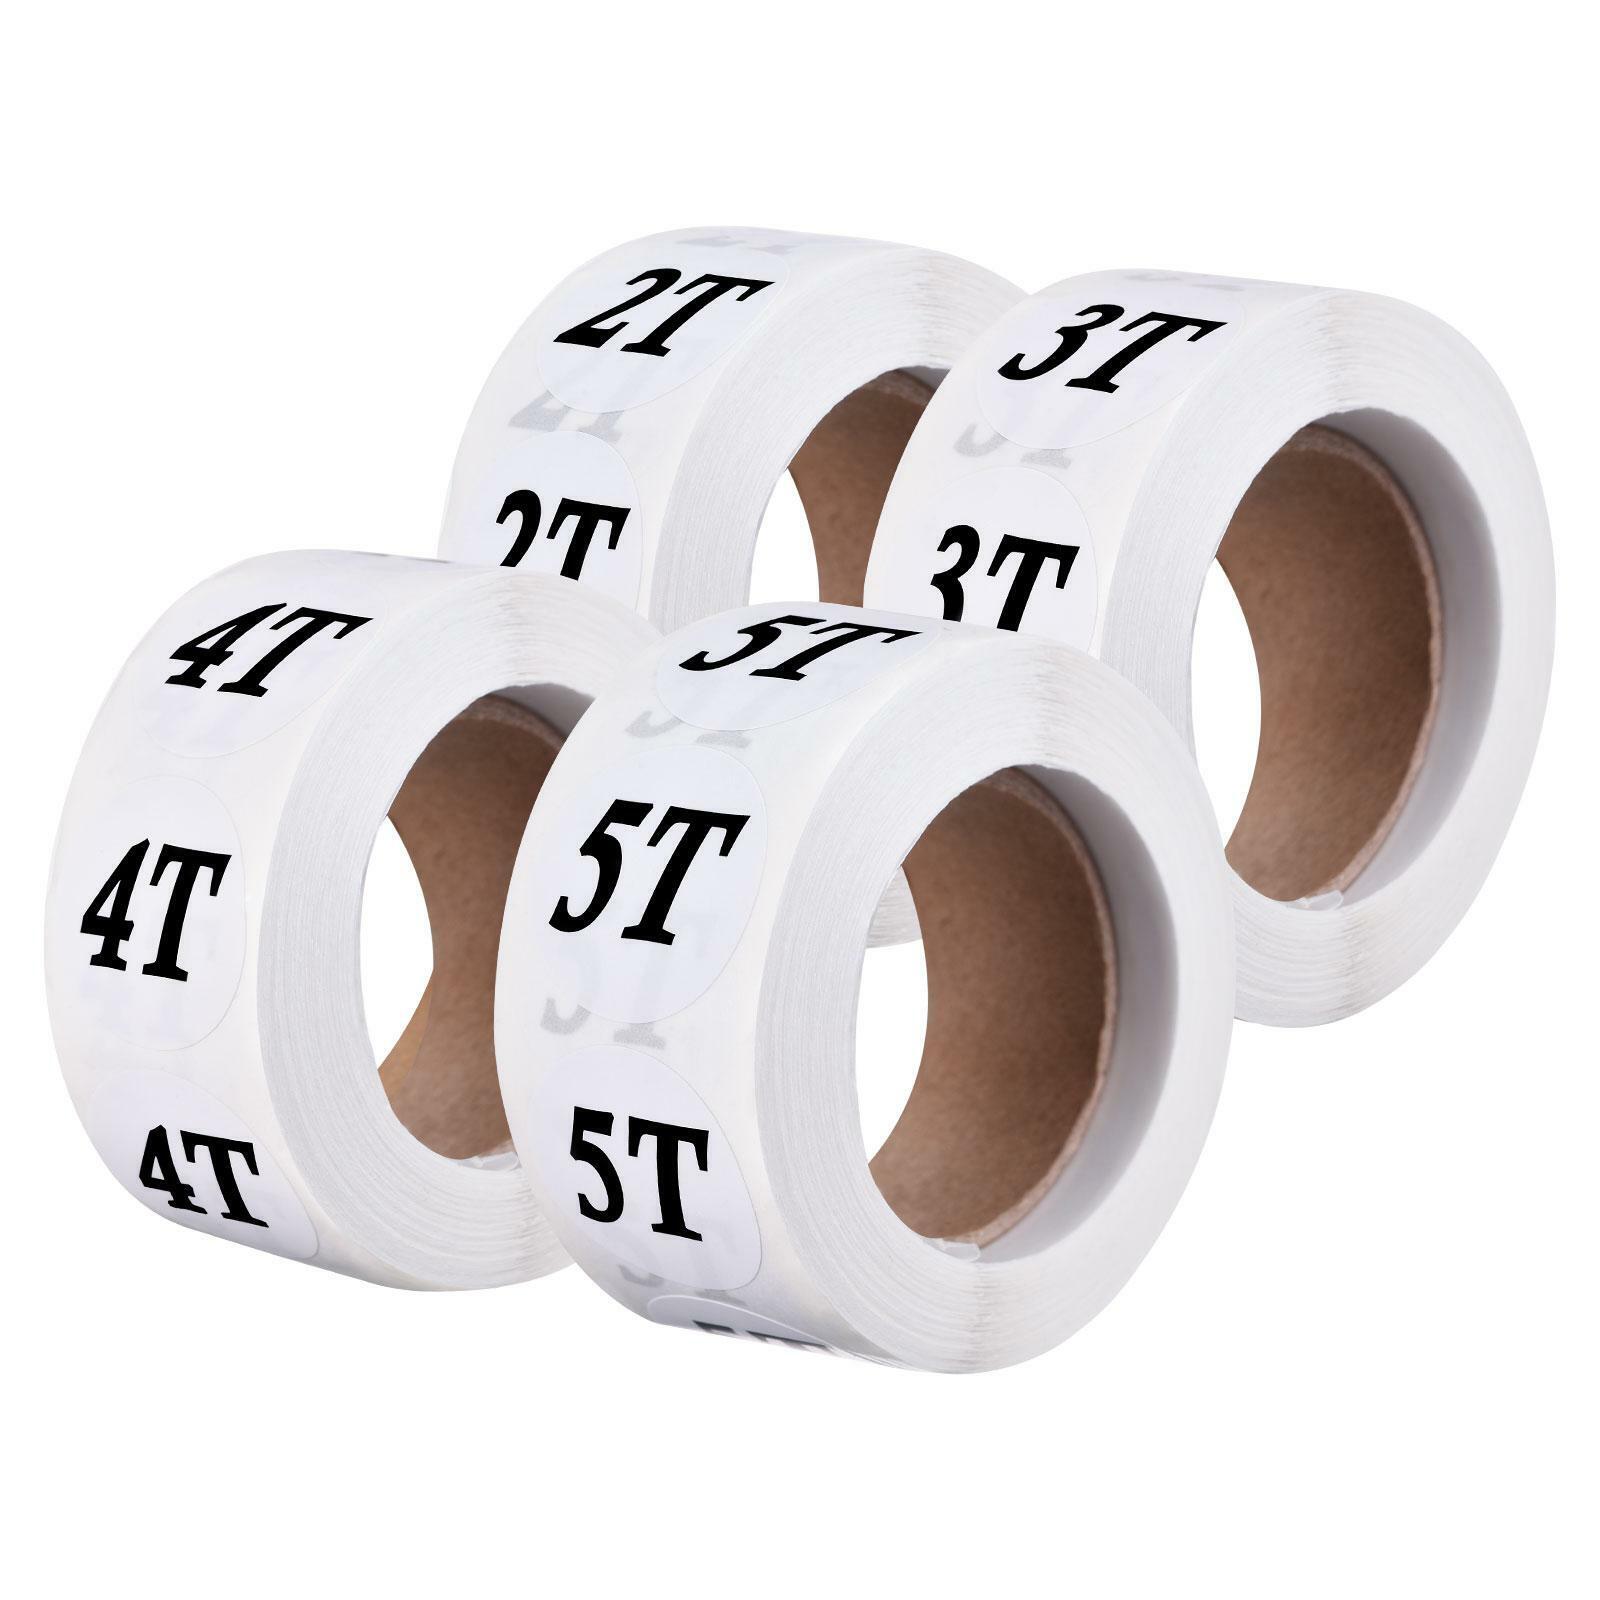 Clothing 2t/3t/4t/5t Size Sticker Label 25mm/1inch Dia 4 Roll 2000 Labels